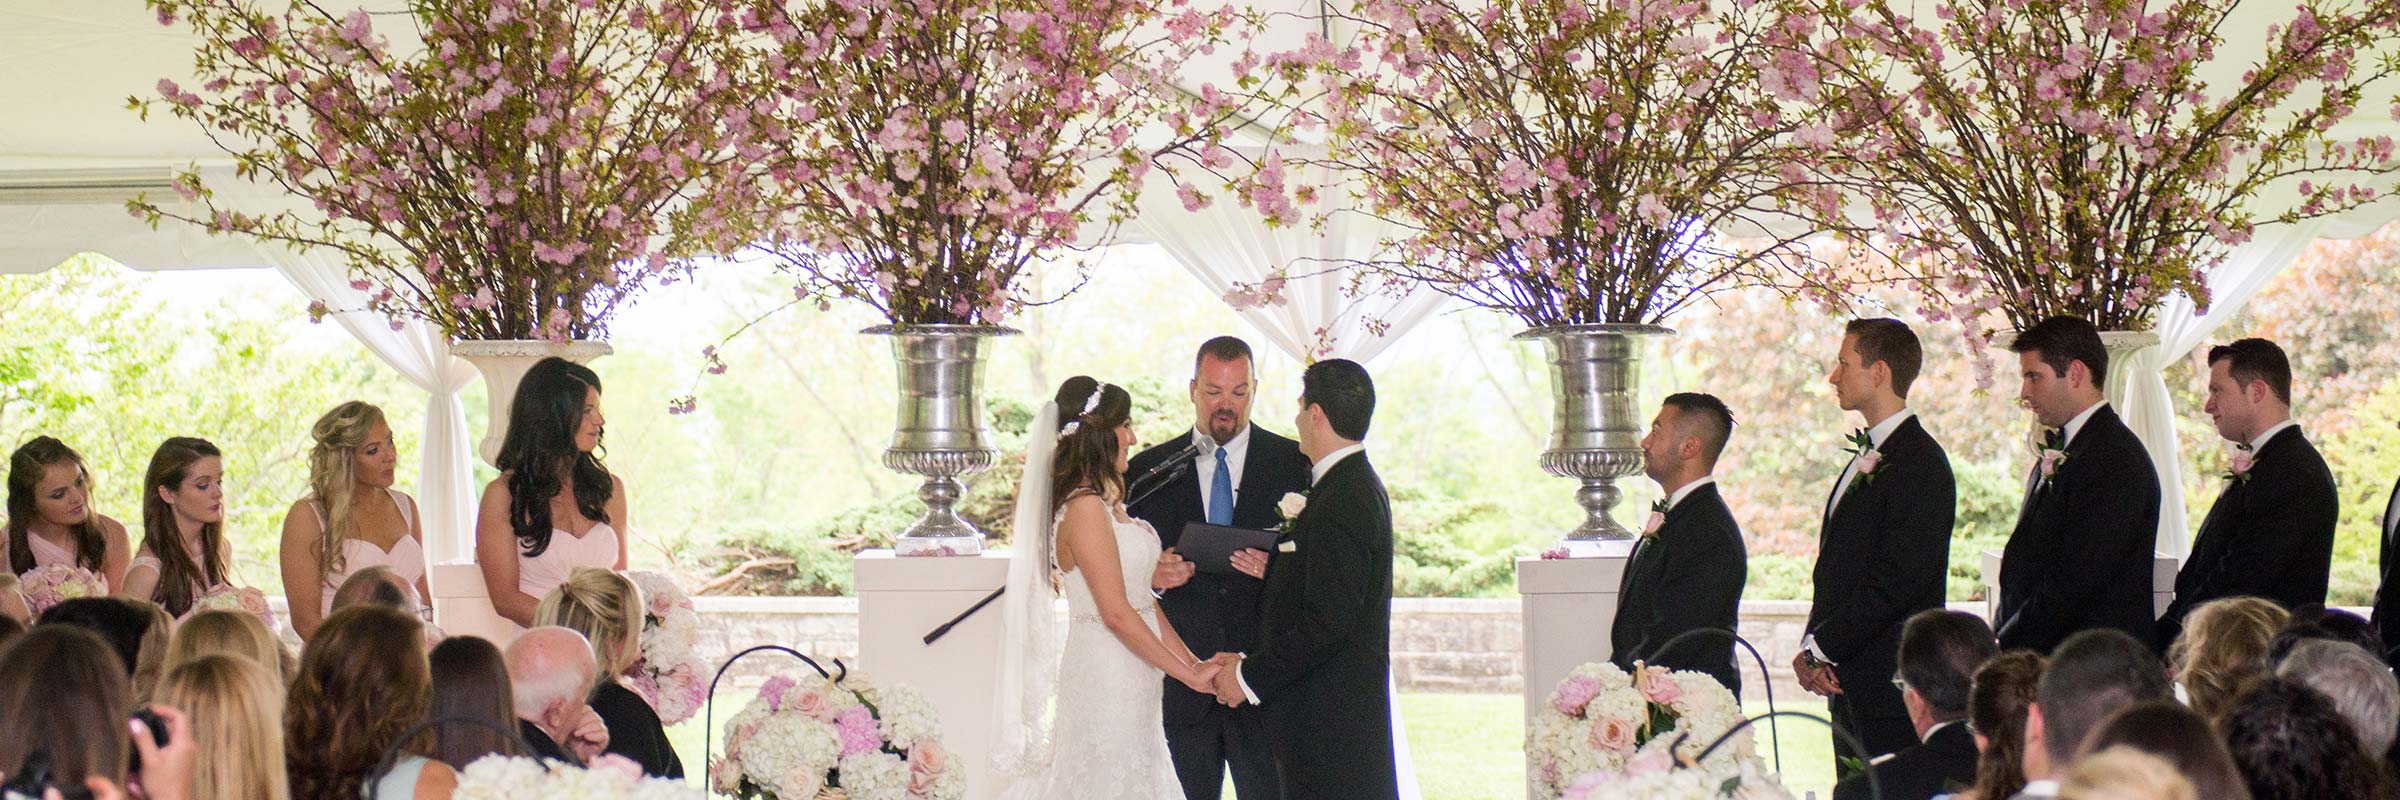 Outdoor Wedding Tent Fresh Flowers Branches